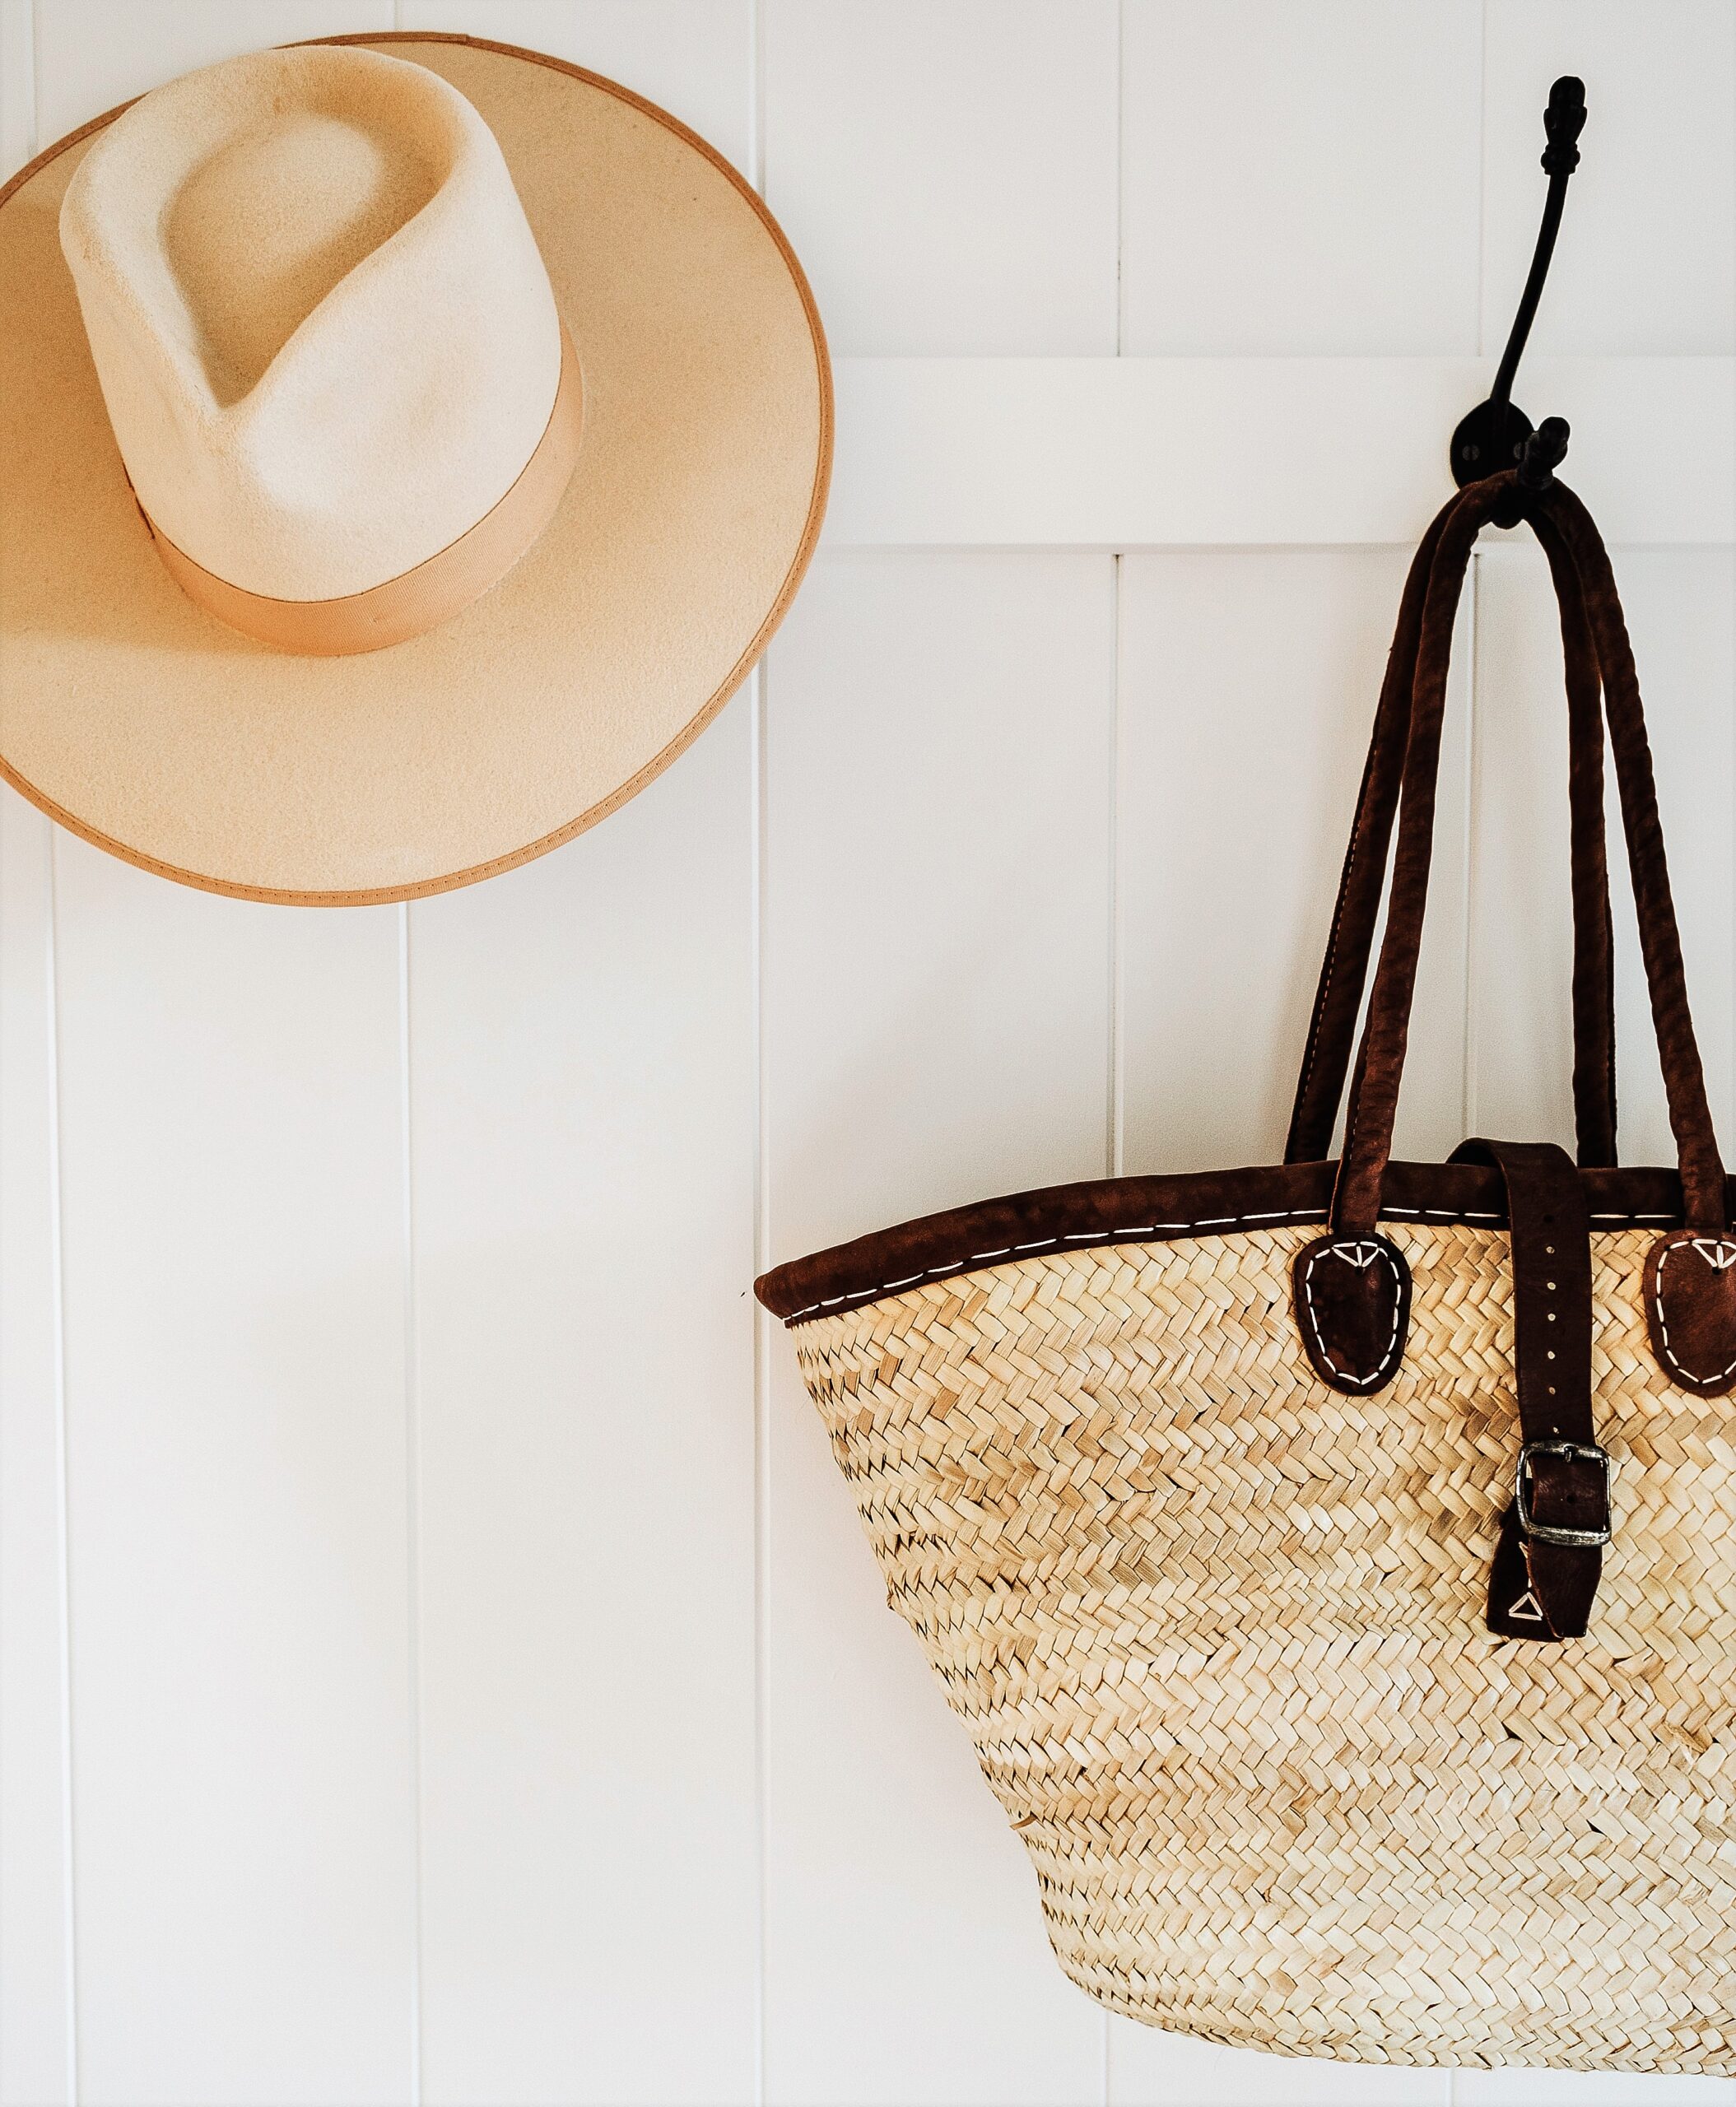 Two black iron hooks are set on a white wall, holding a weaved basket and a wide-brimmed Australian outback hat in light color.